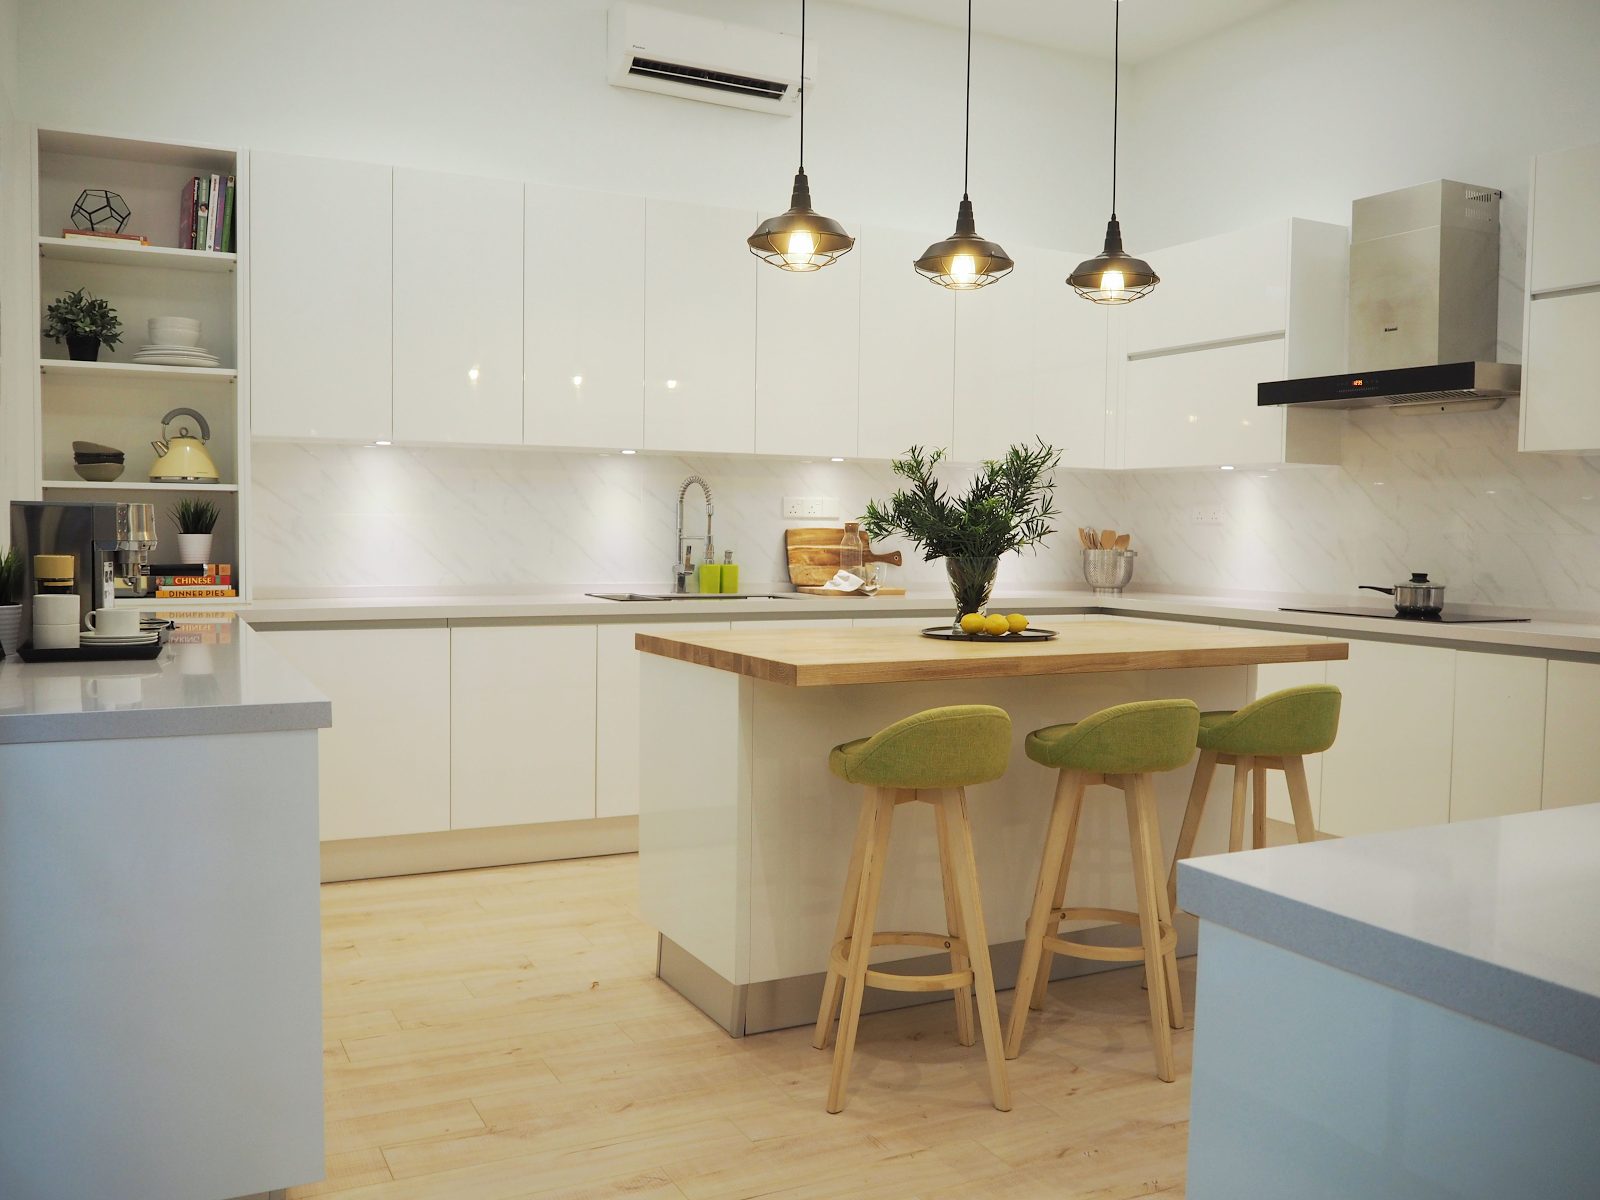 U-shaped kitchen design for Superlink Terrace at Temasya Citra, Glenmarie. Project by: Meridian Inspiration